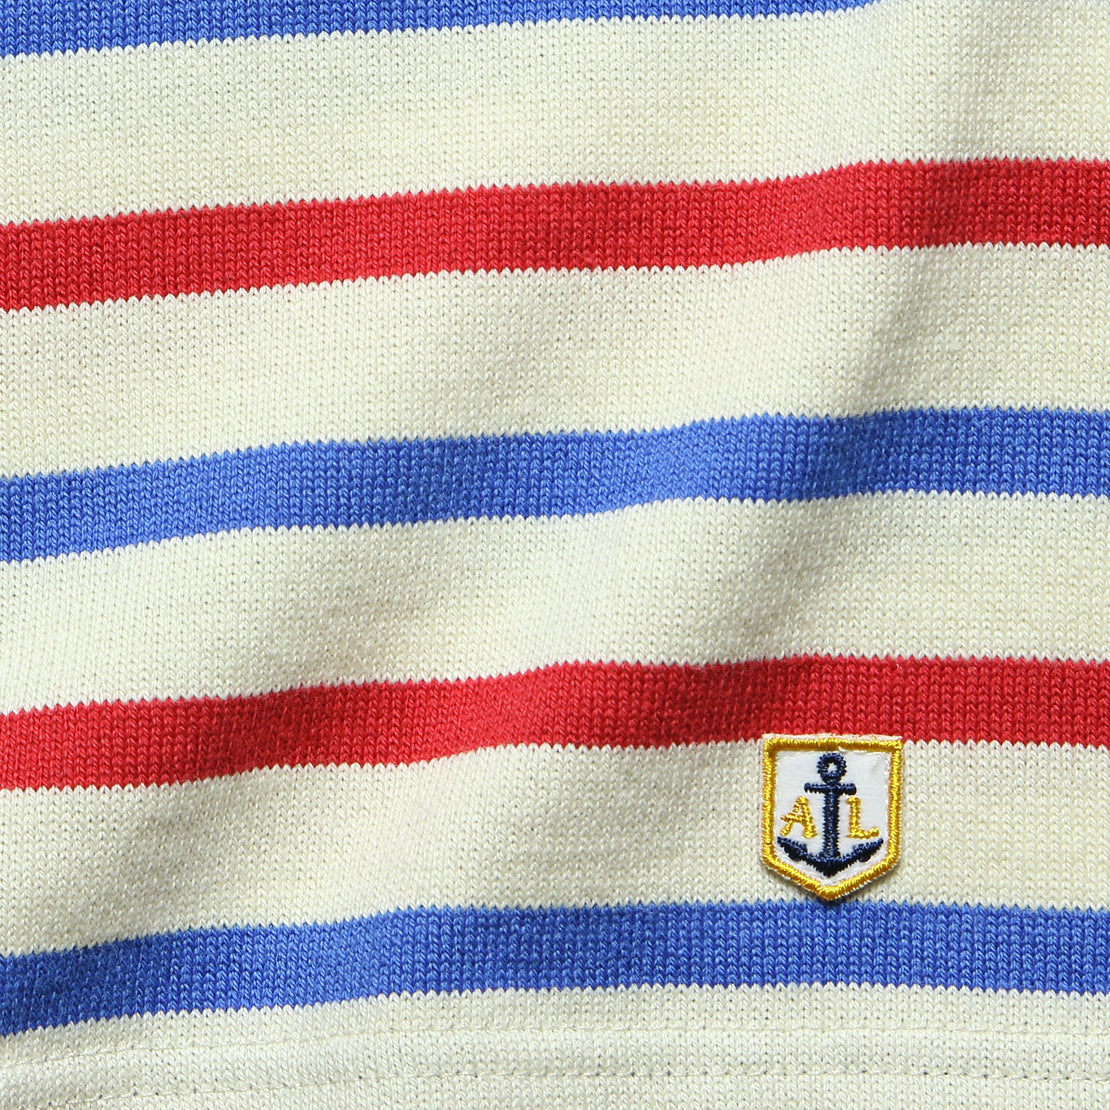 3/4 Sleeve Marine Stripe Top - Natural/Red/Blue - Armor Lux - STAG Provisions - W - Tops - L/S Knit